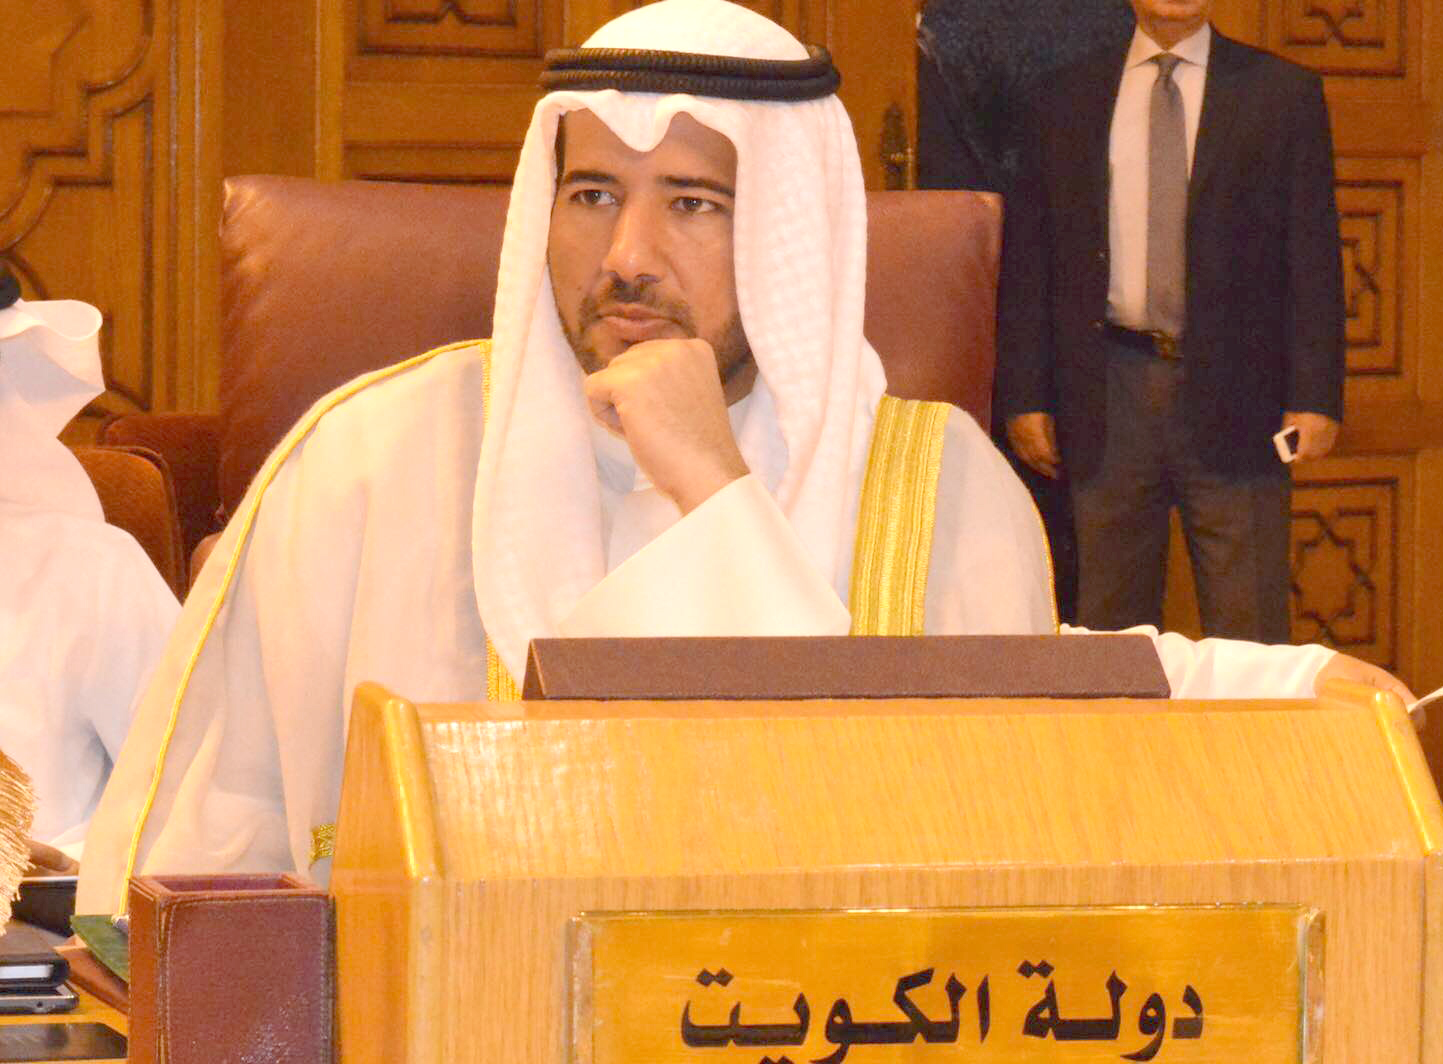 Director General and Board Chairman of the Environment Public Authority (EPA) Sheikh Abdullah Ahmad Al-Sabah